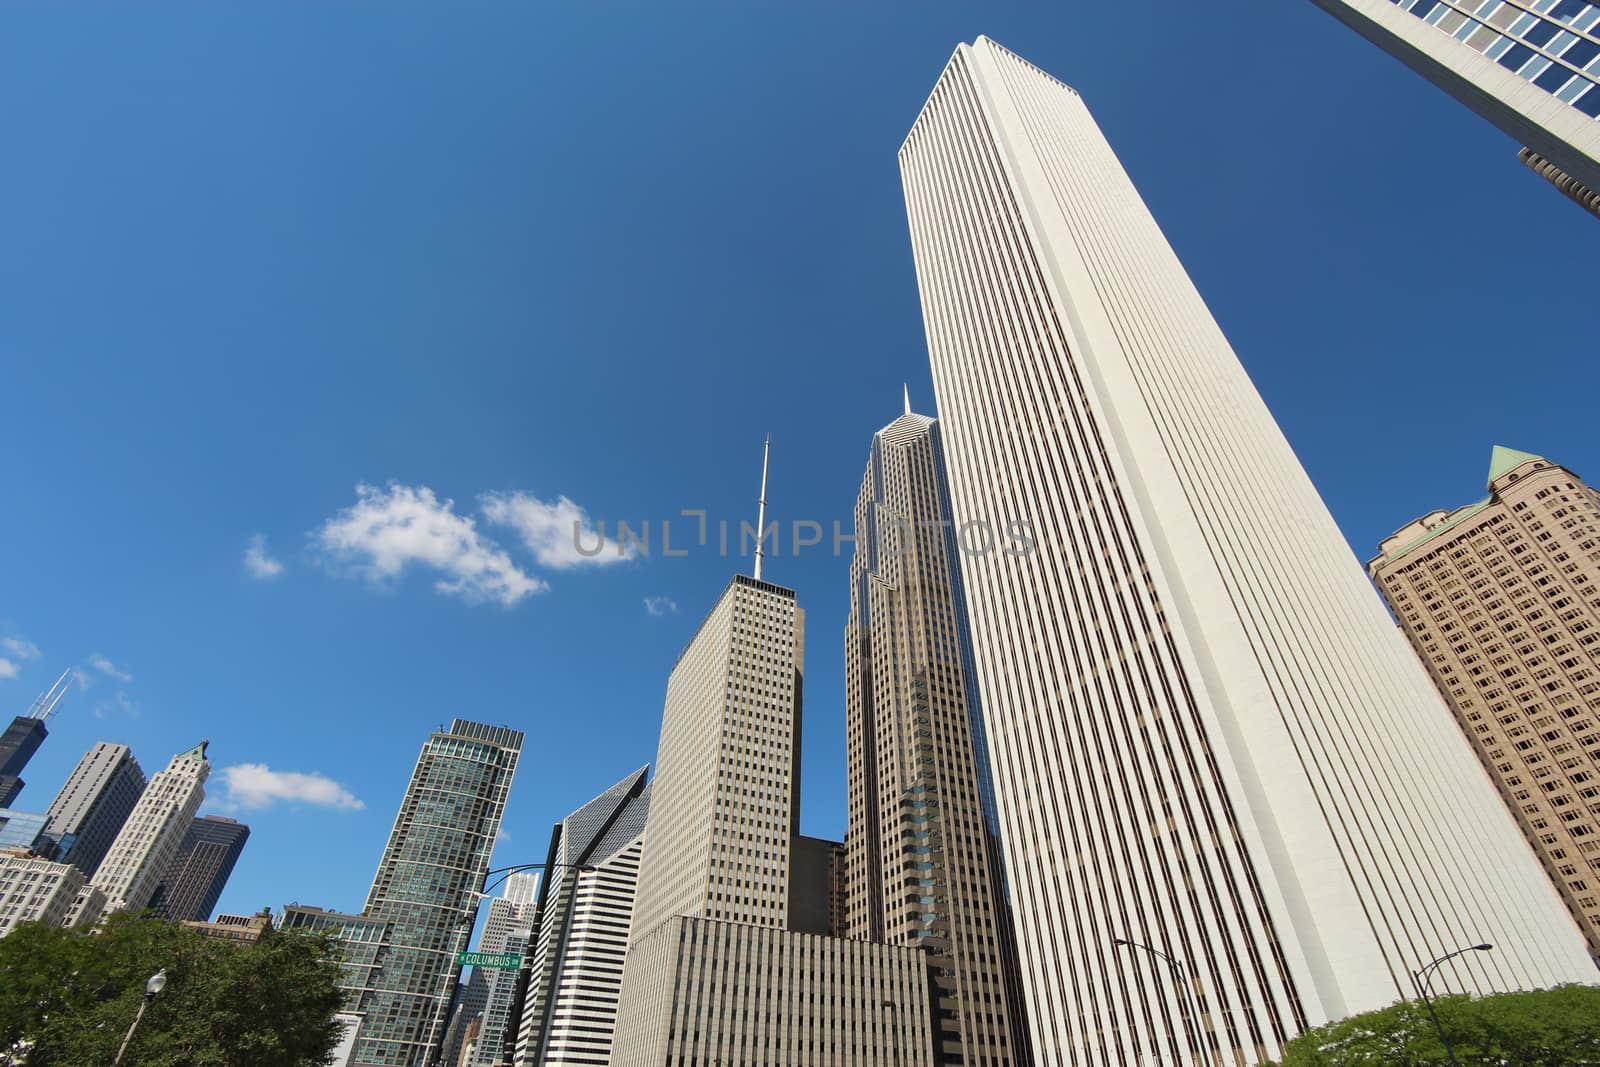 Skyscrapers in downtown Chicago, Illinois by sgoodwin4813